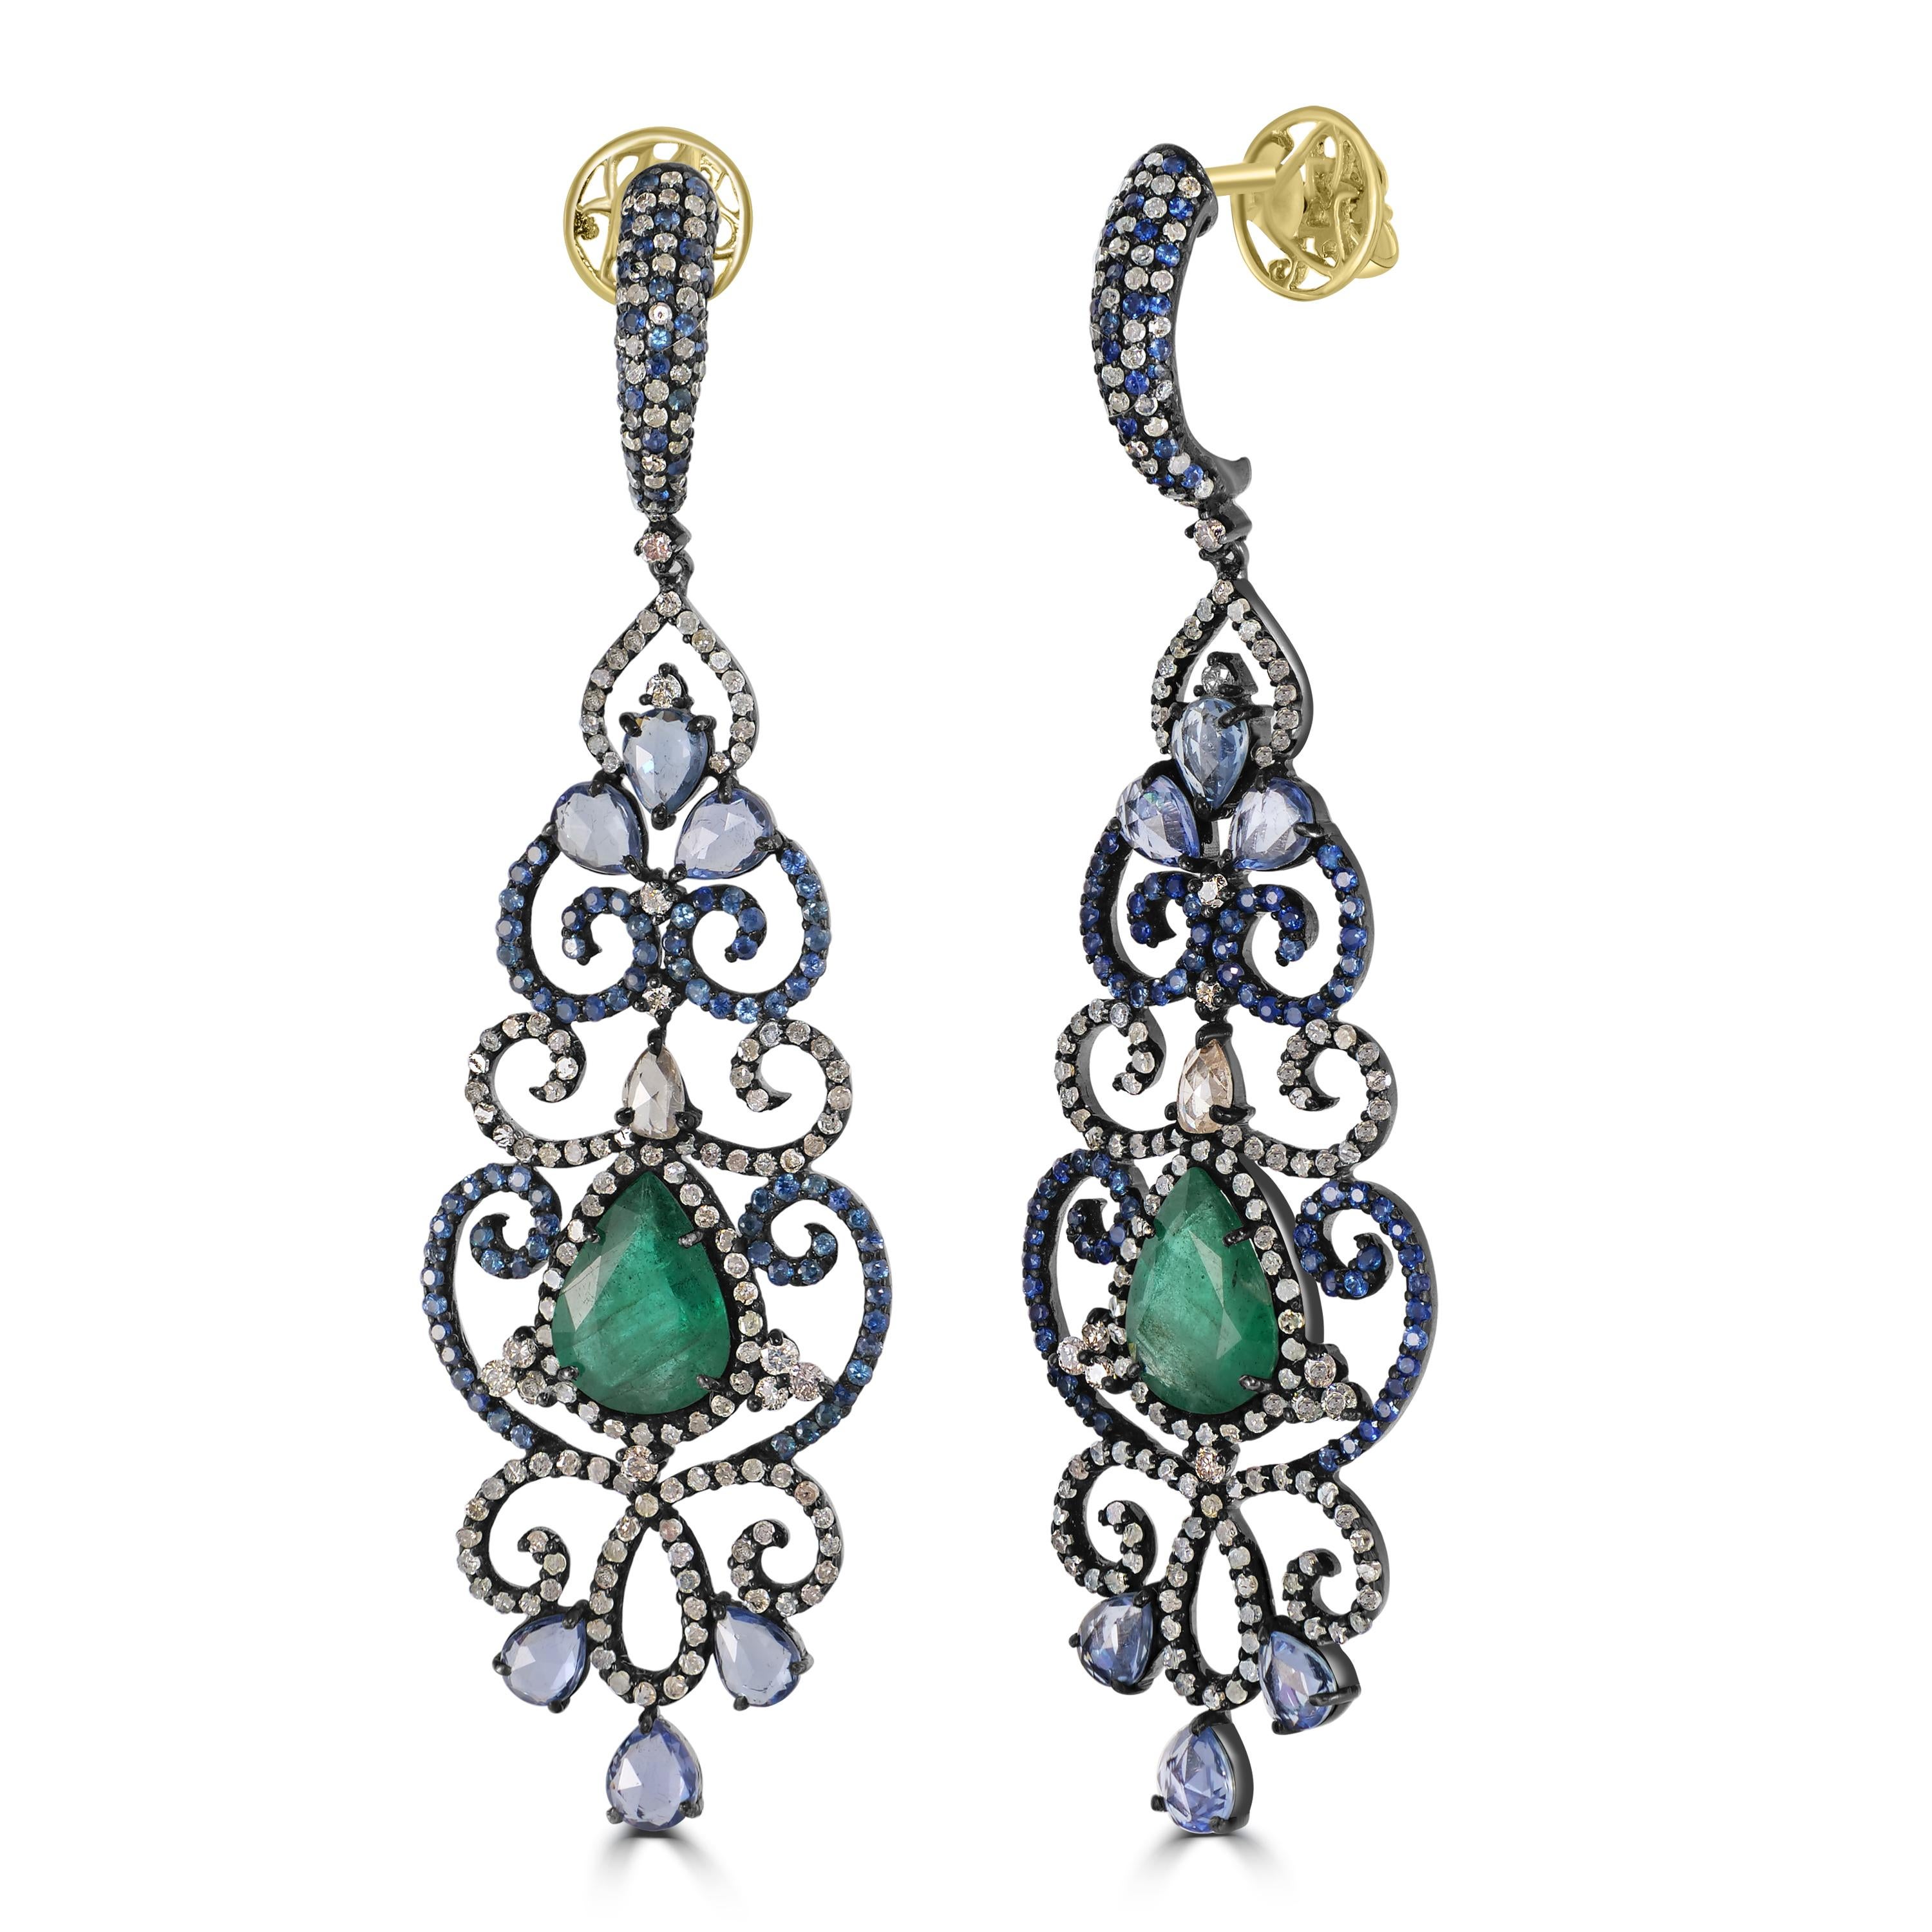 Introducing our exquisite Victorian 4.05 Cttw. Emerald, Blue Sapphire, and Diamond Chandelier Earrings, a true testament to timeless elegance and luxury.

Crafted with meticulous attention to detail, these chandelier earrings feature an intricate